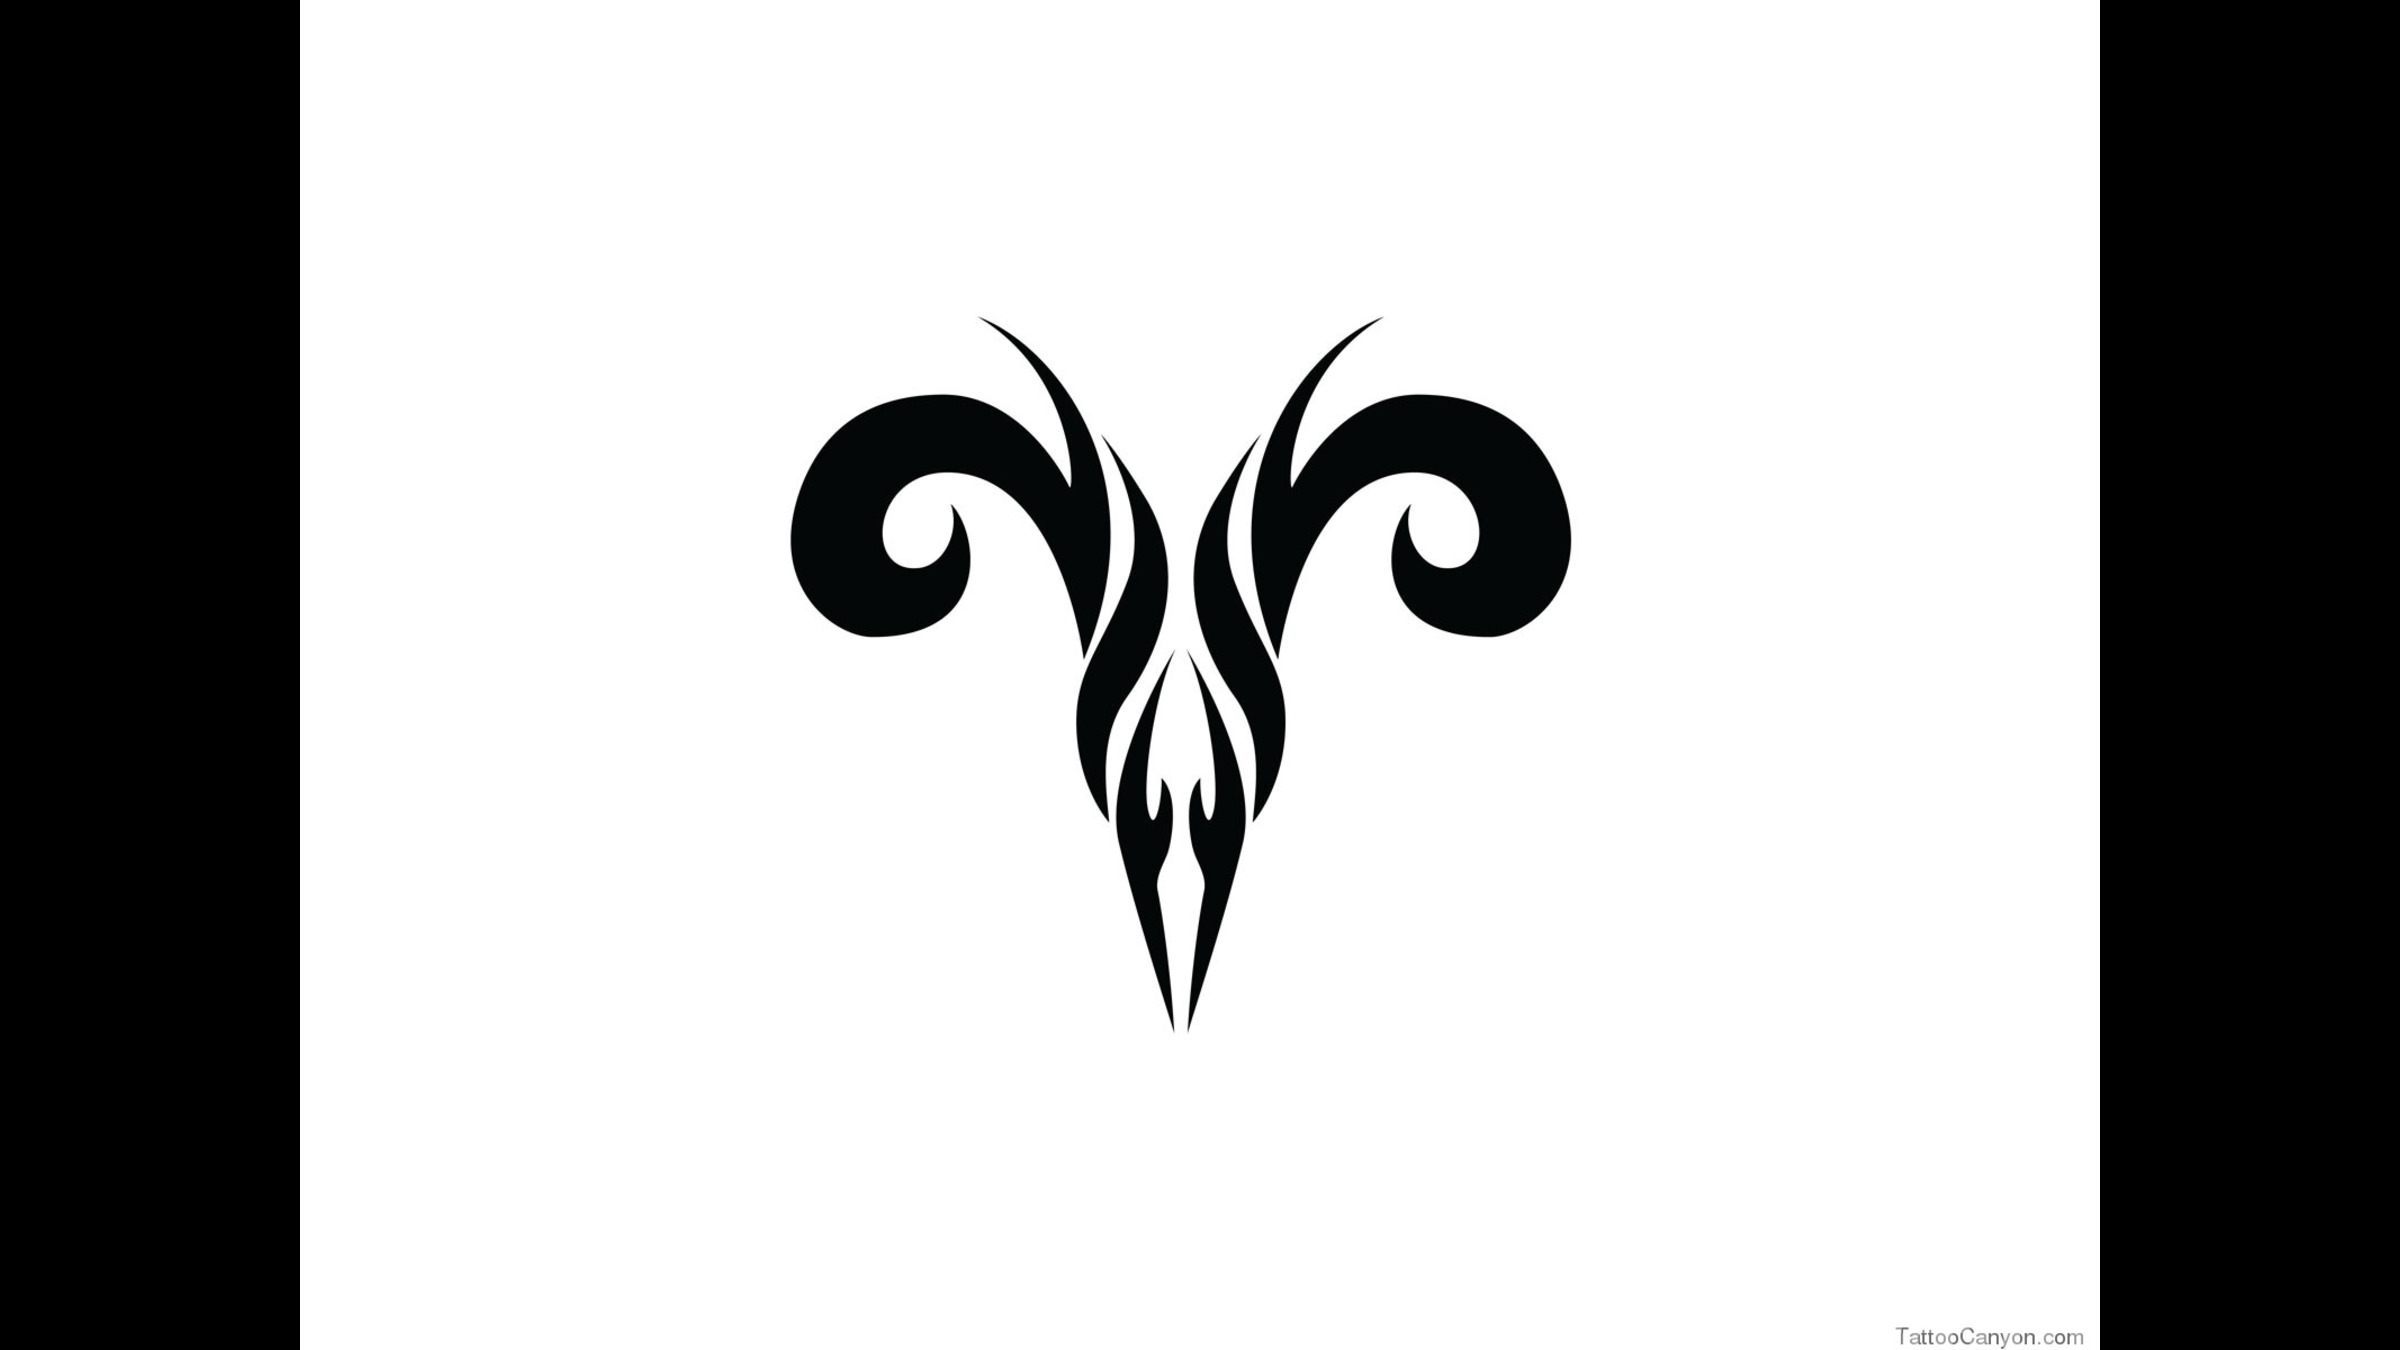 Aries Tattoo Ideas for Men and Women: Design Inspirations and Meanings -  TatRing